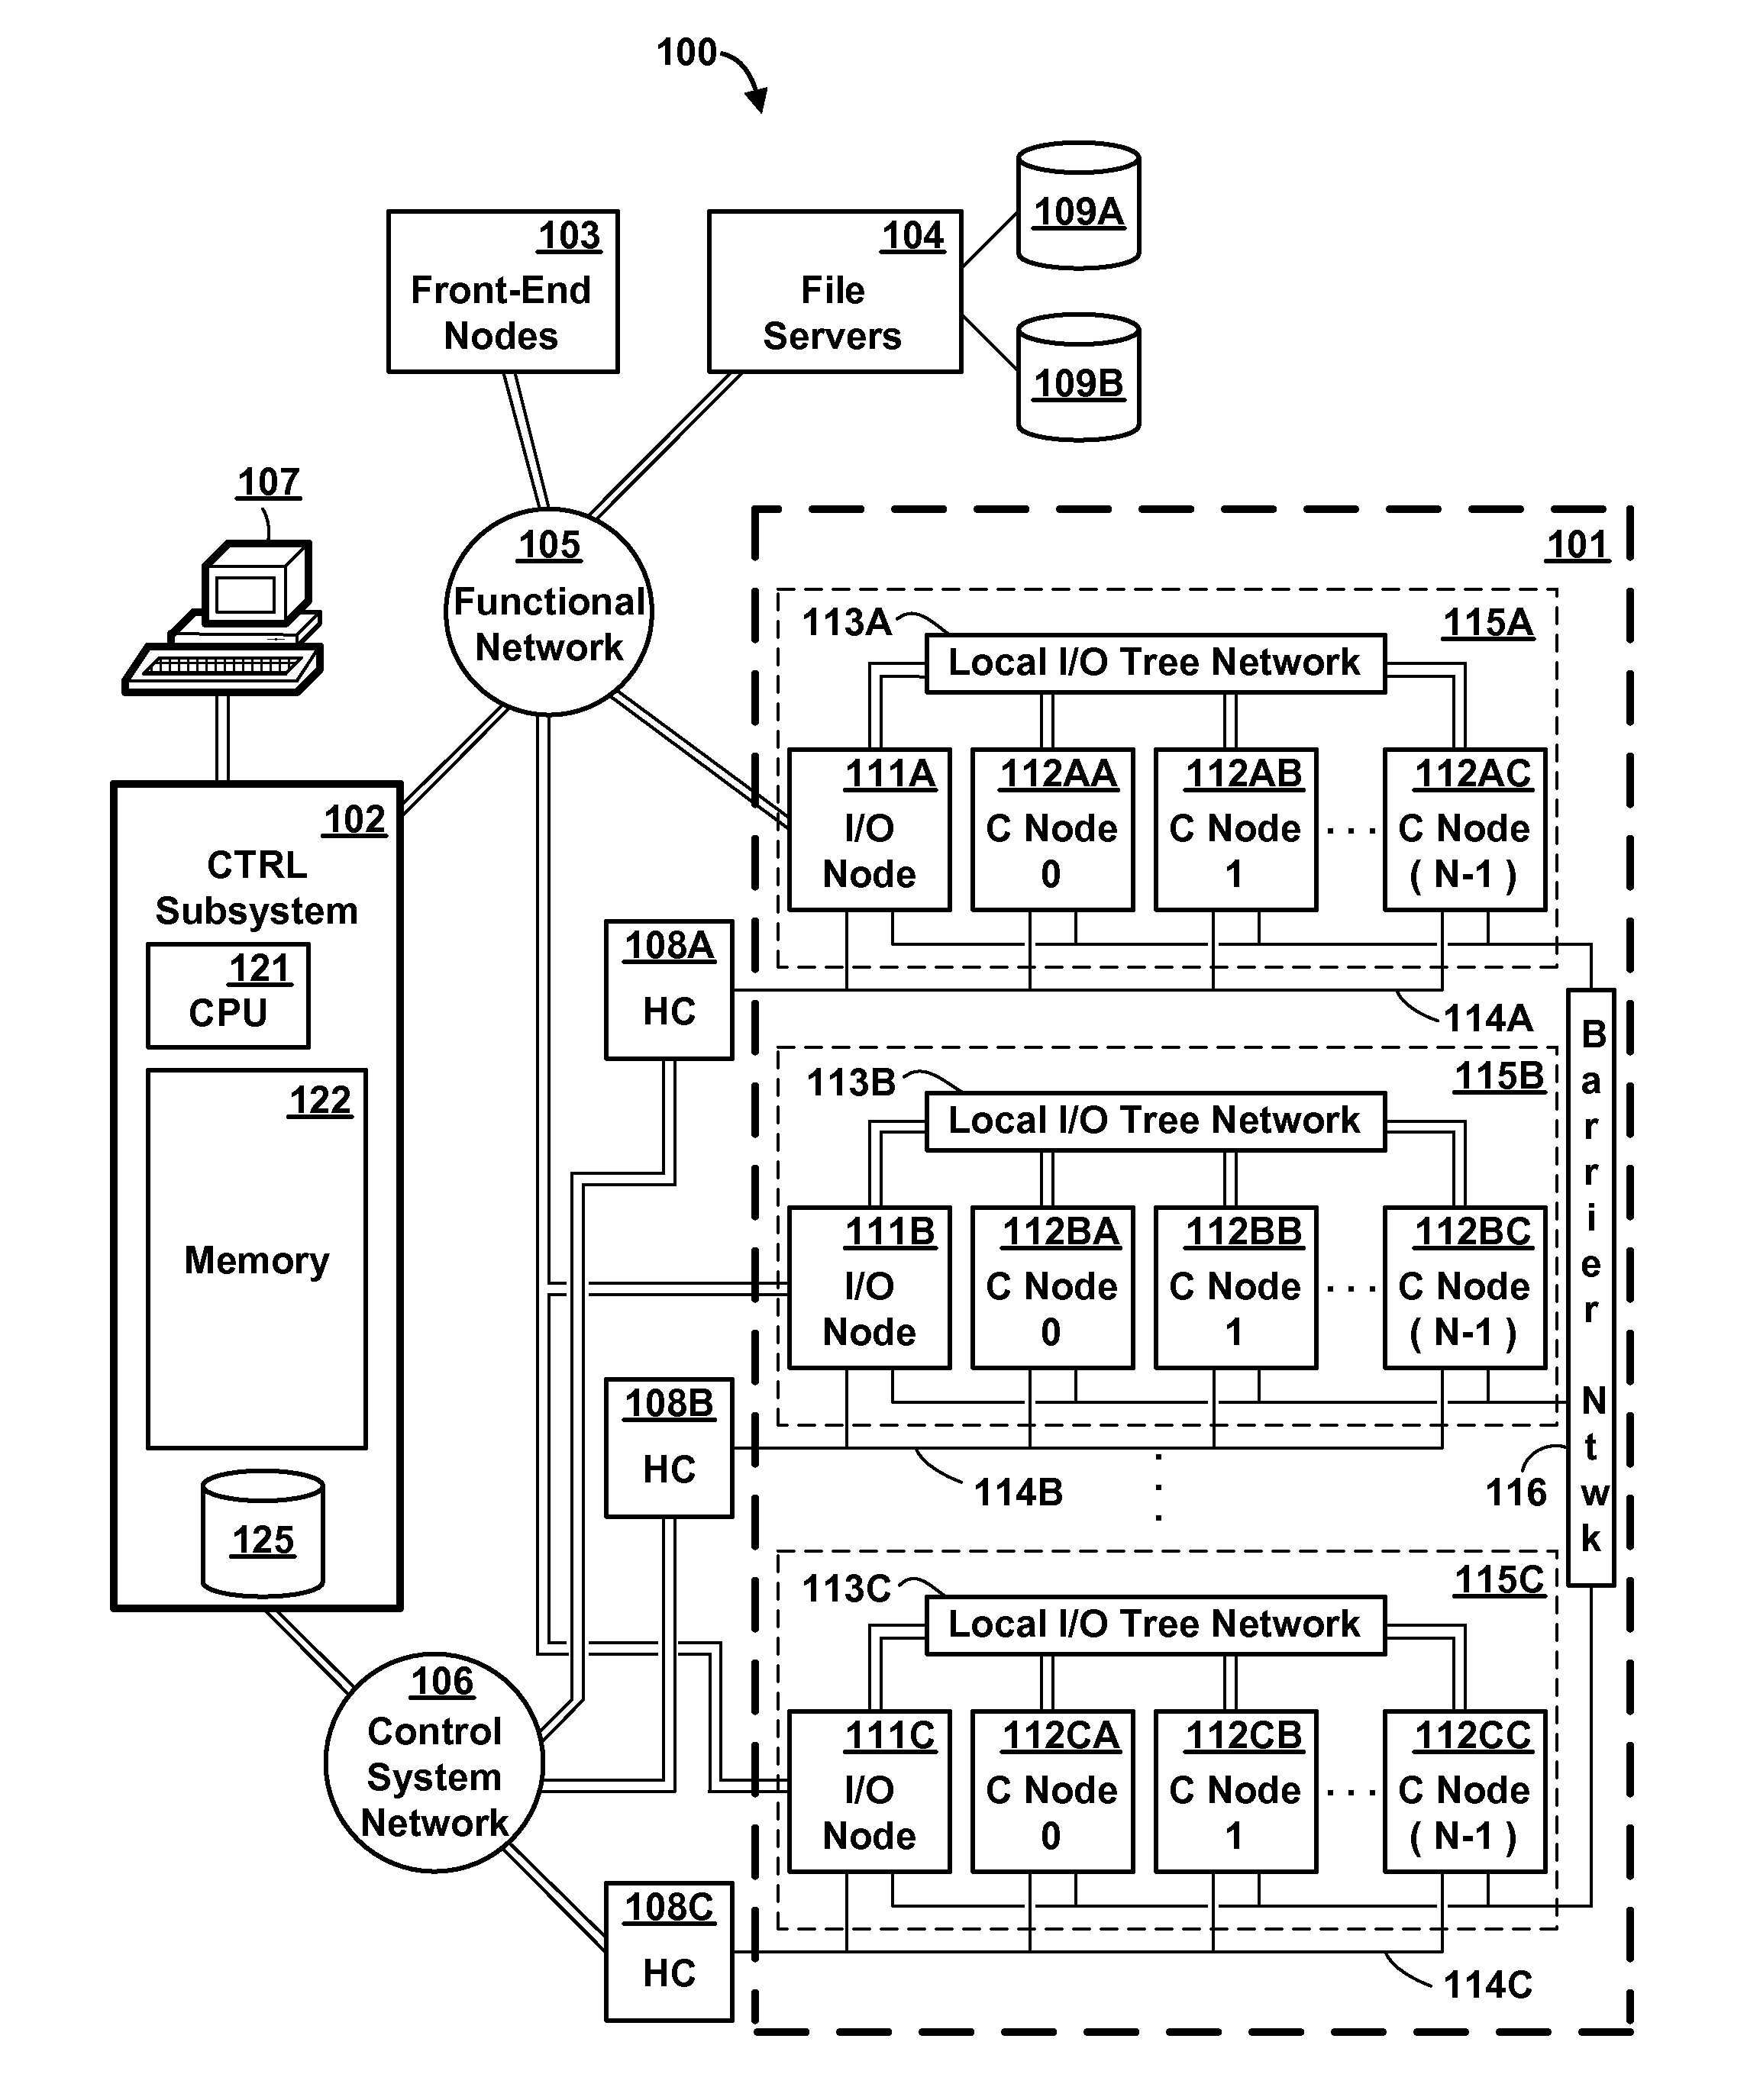 Method and apparatus for routing data in an inter-nodal communications lattice of a massively parallel computer system by employing bandwidth shells at areas of overutilization